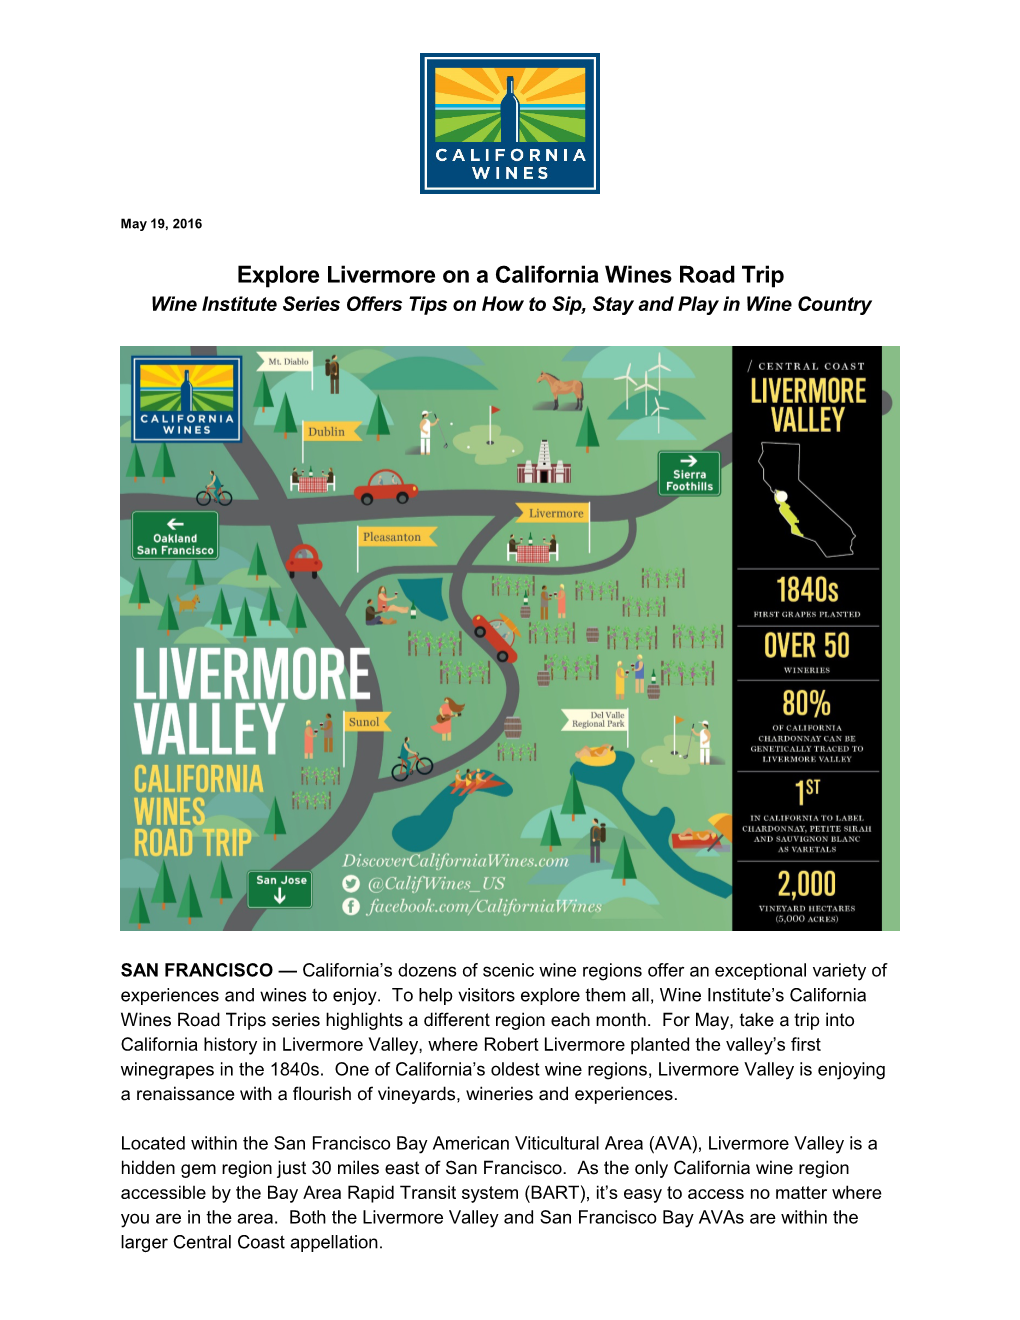 Explore Livermore on a California Wines Road Trip Wine Institute Series Offers Tips on How to Sip, Stay and Play in Wine Country